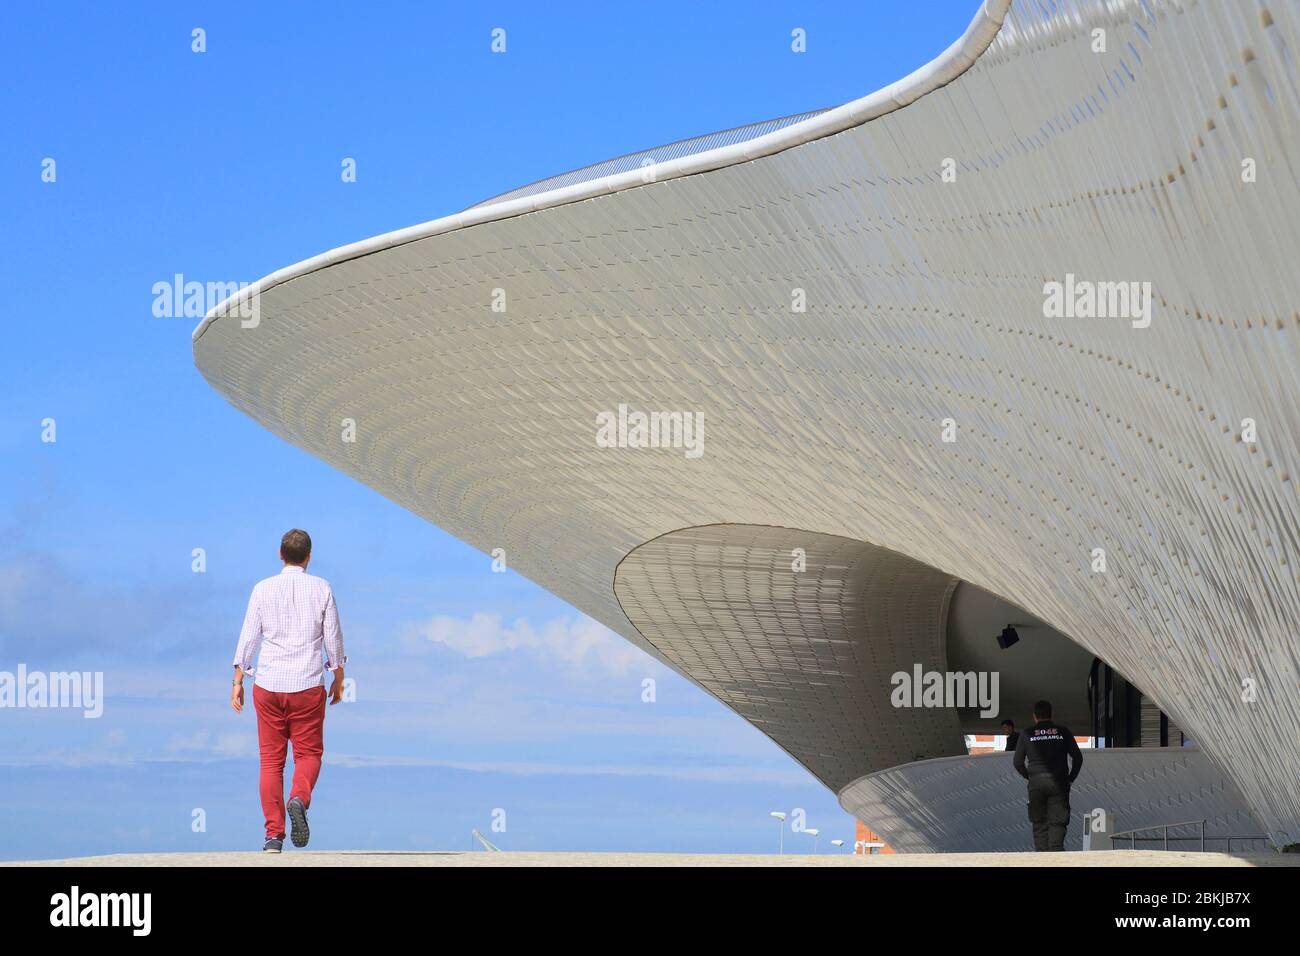 Portugal, Lisbon, Belém, MAAT (Museum of Art, Architecture and Technology or Museu de Arte, Arquitetura e Tecnologia) inaugurated in 2016 and designed by the British architect Amanda Levete Stock Photo